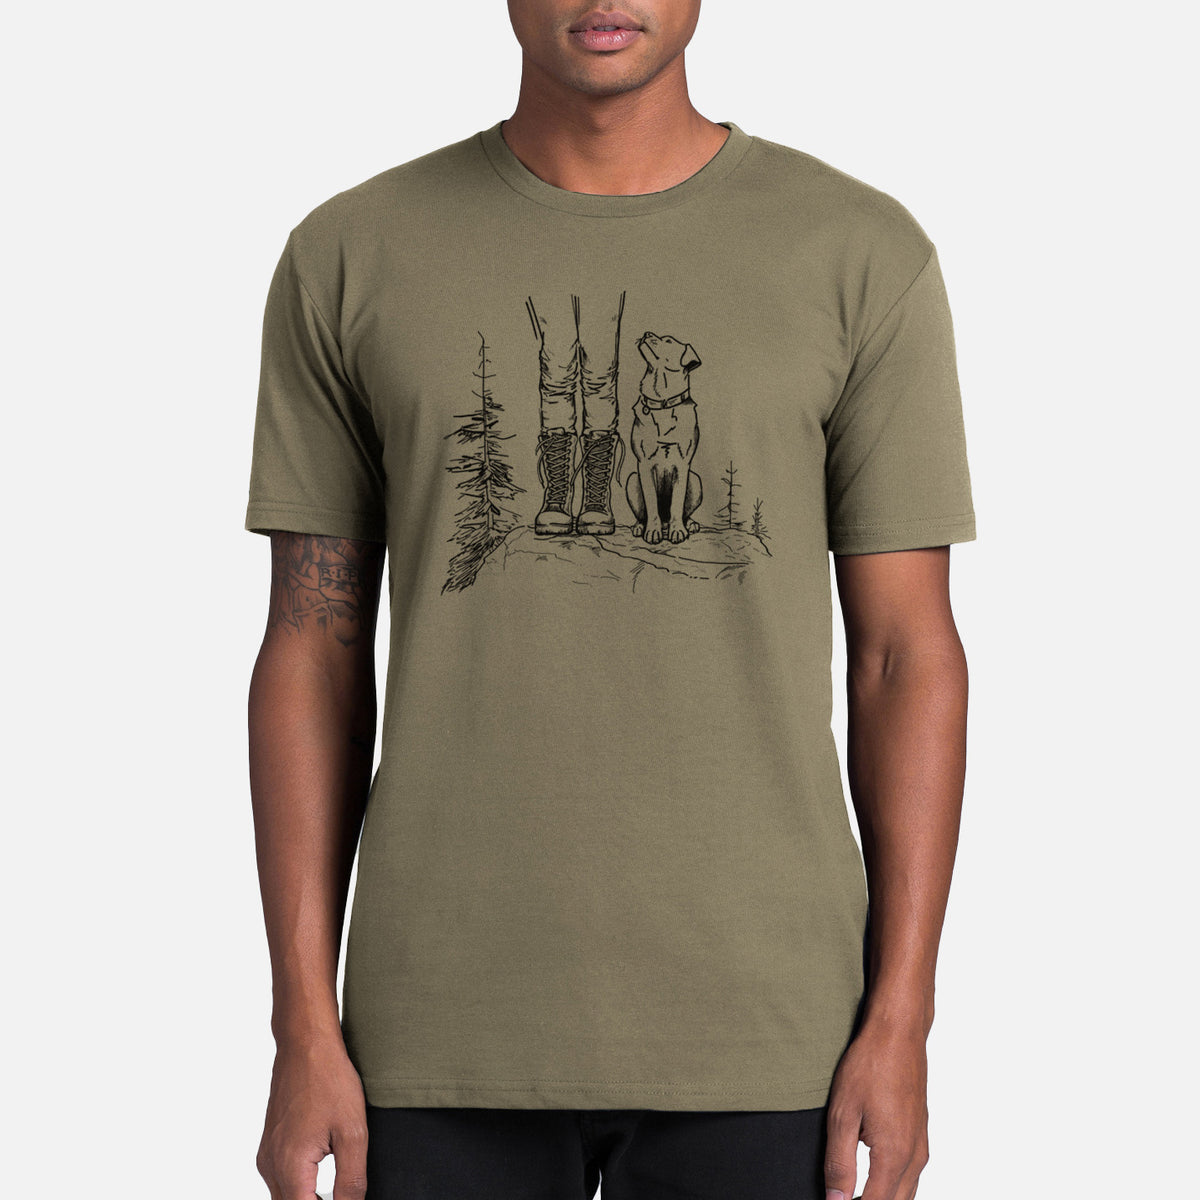 Trail Companions - Hiking with Dogs - Mens Everyday Staple Tee